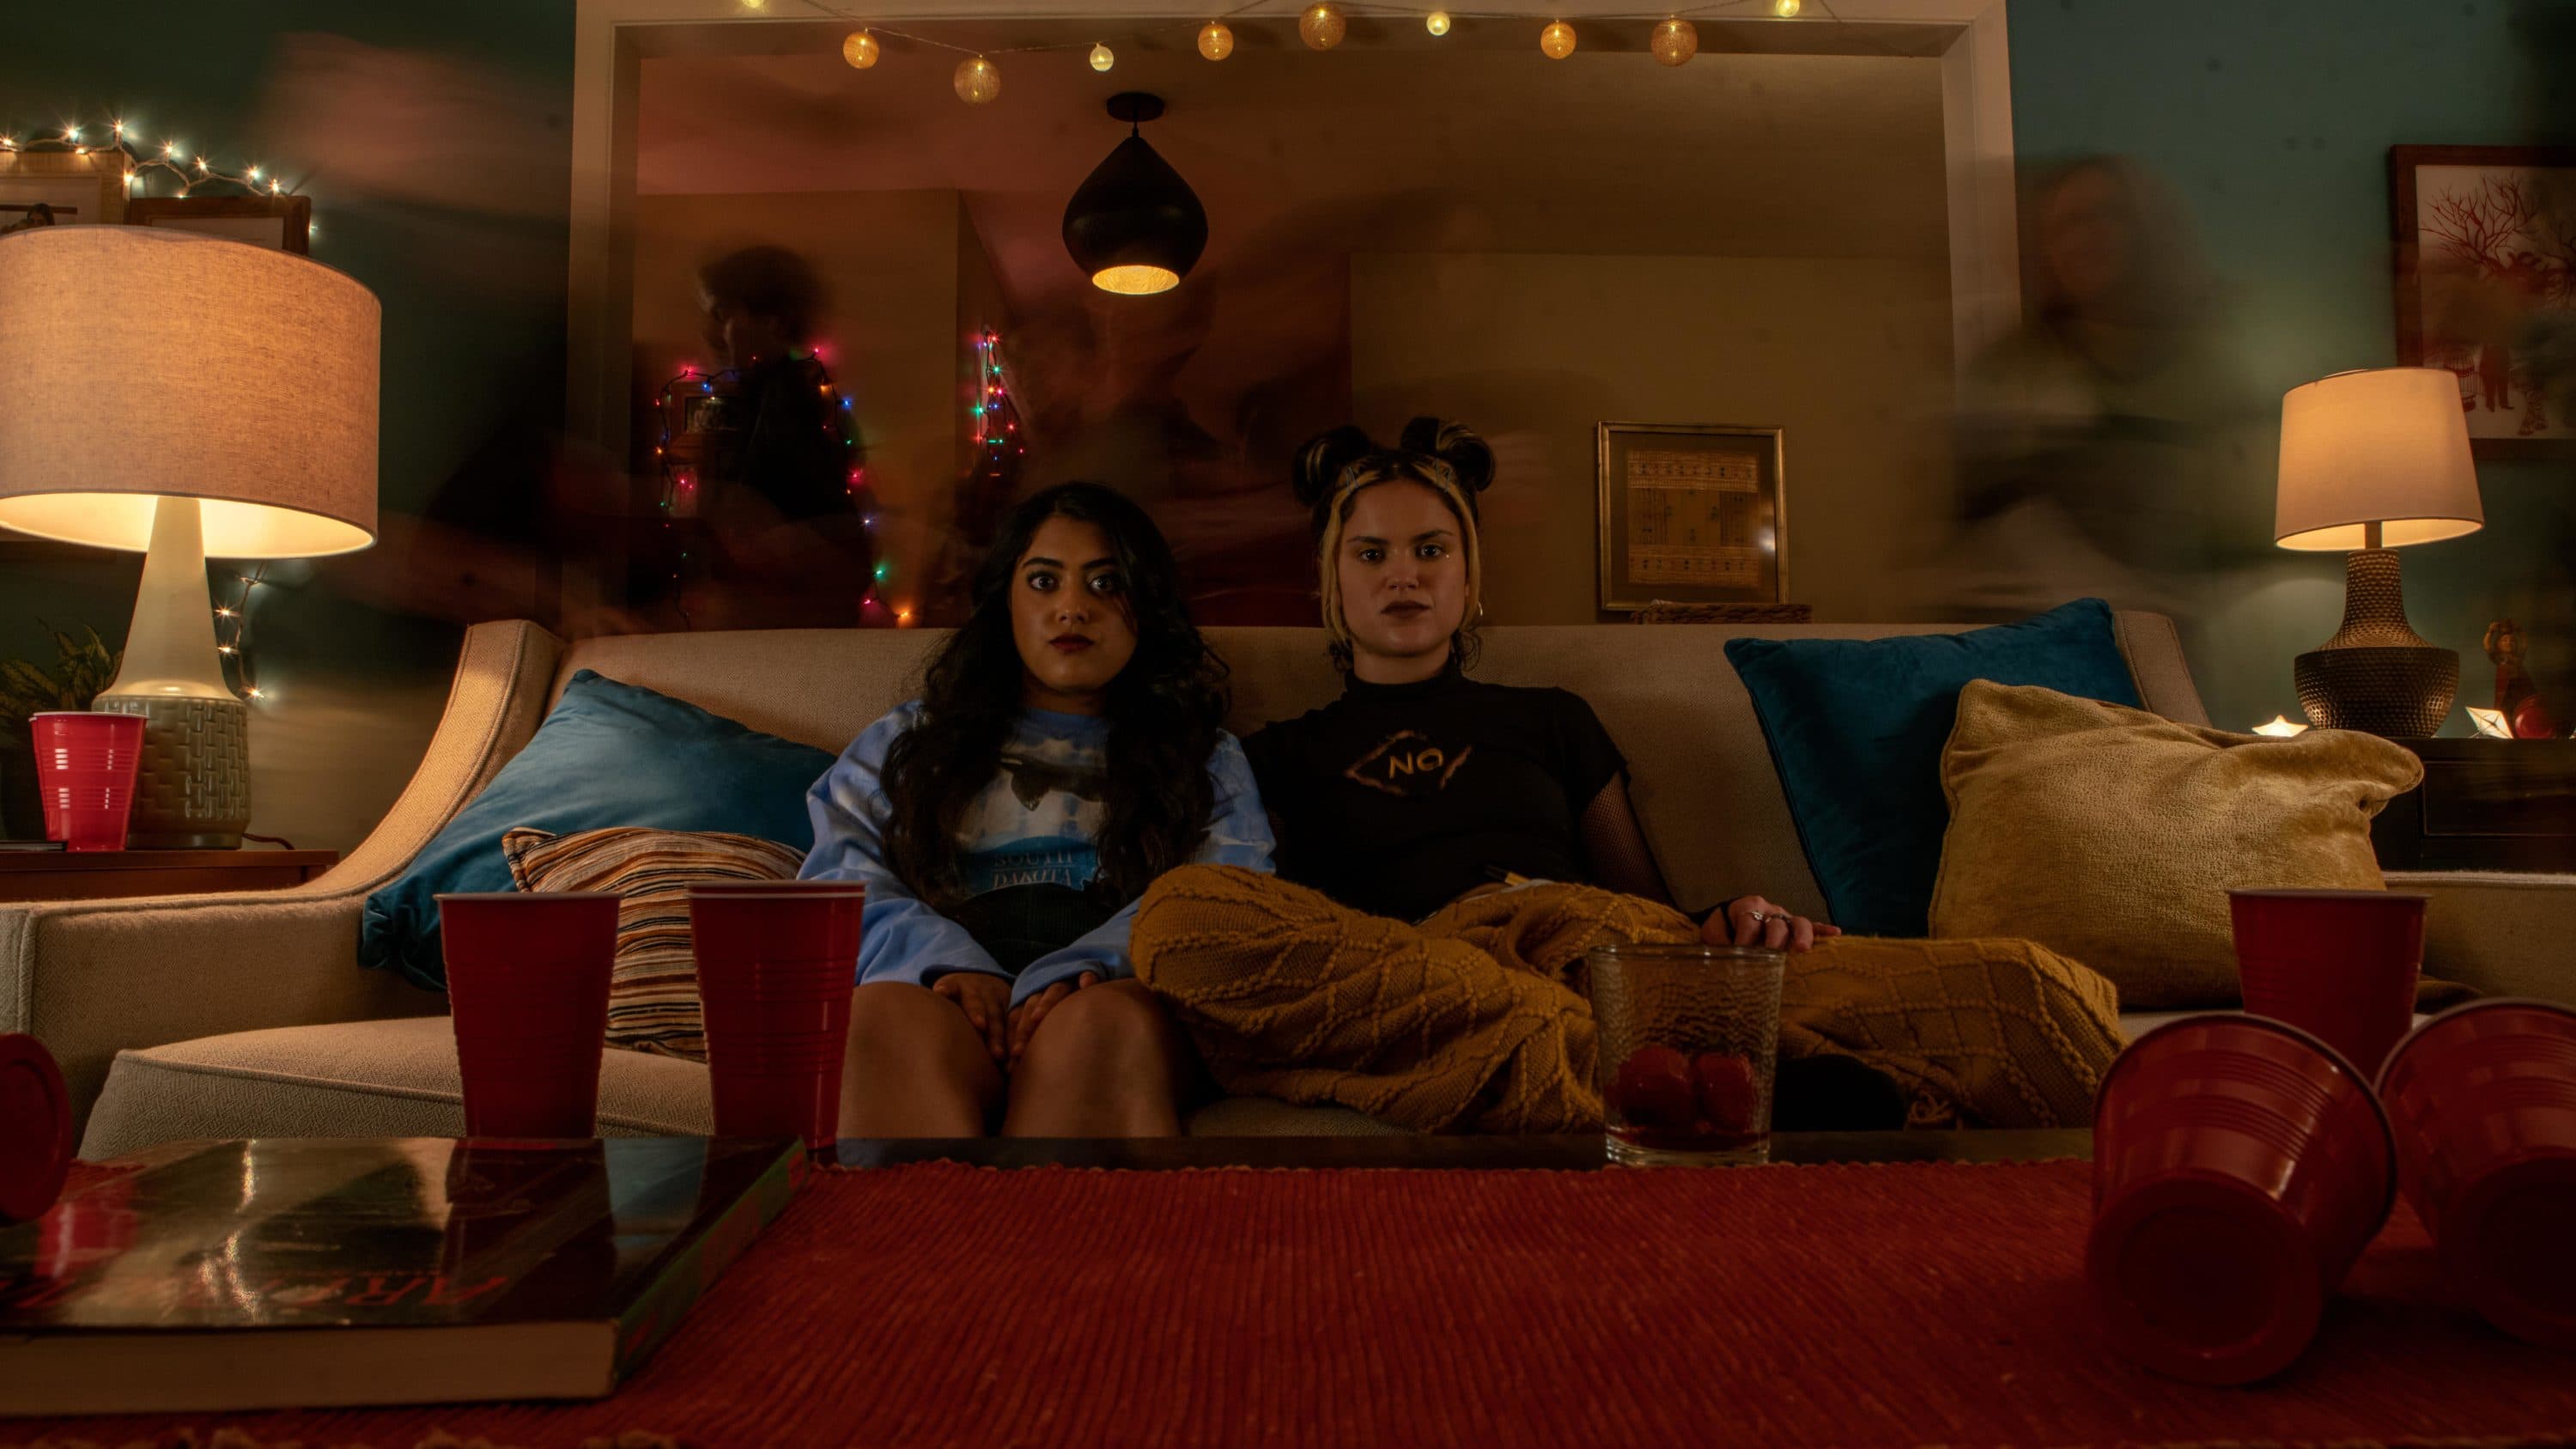 Kuhoo Verma (left) and Victoria Moroles (right) in a still from the film &quot;Plan B.&quot; (Courtesy Brett Roedel/Hulu)